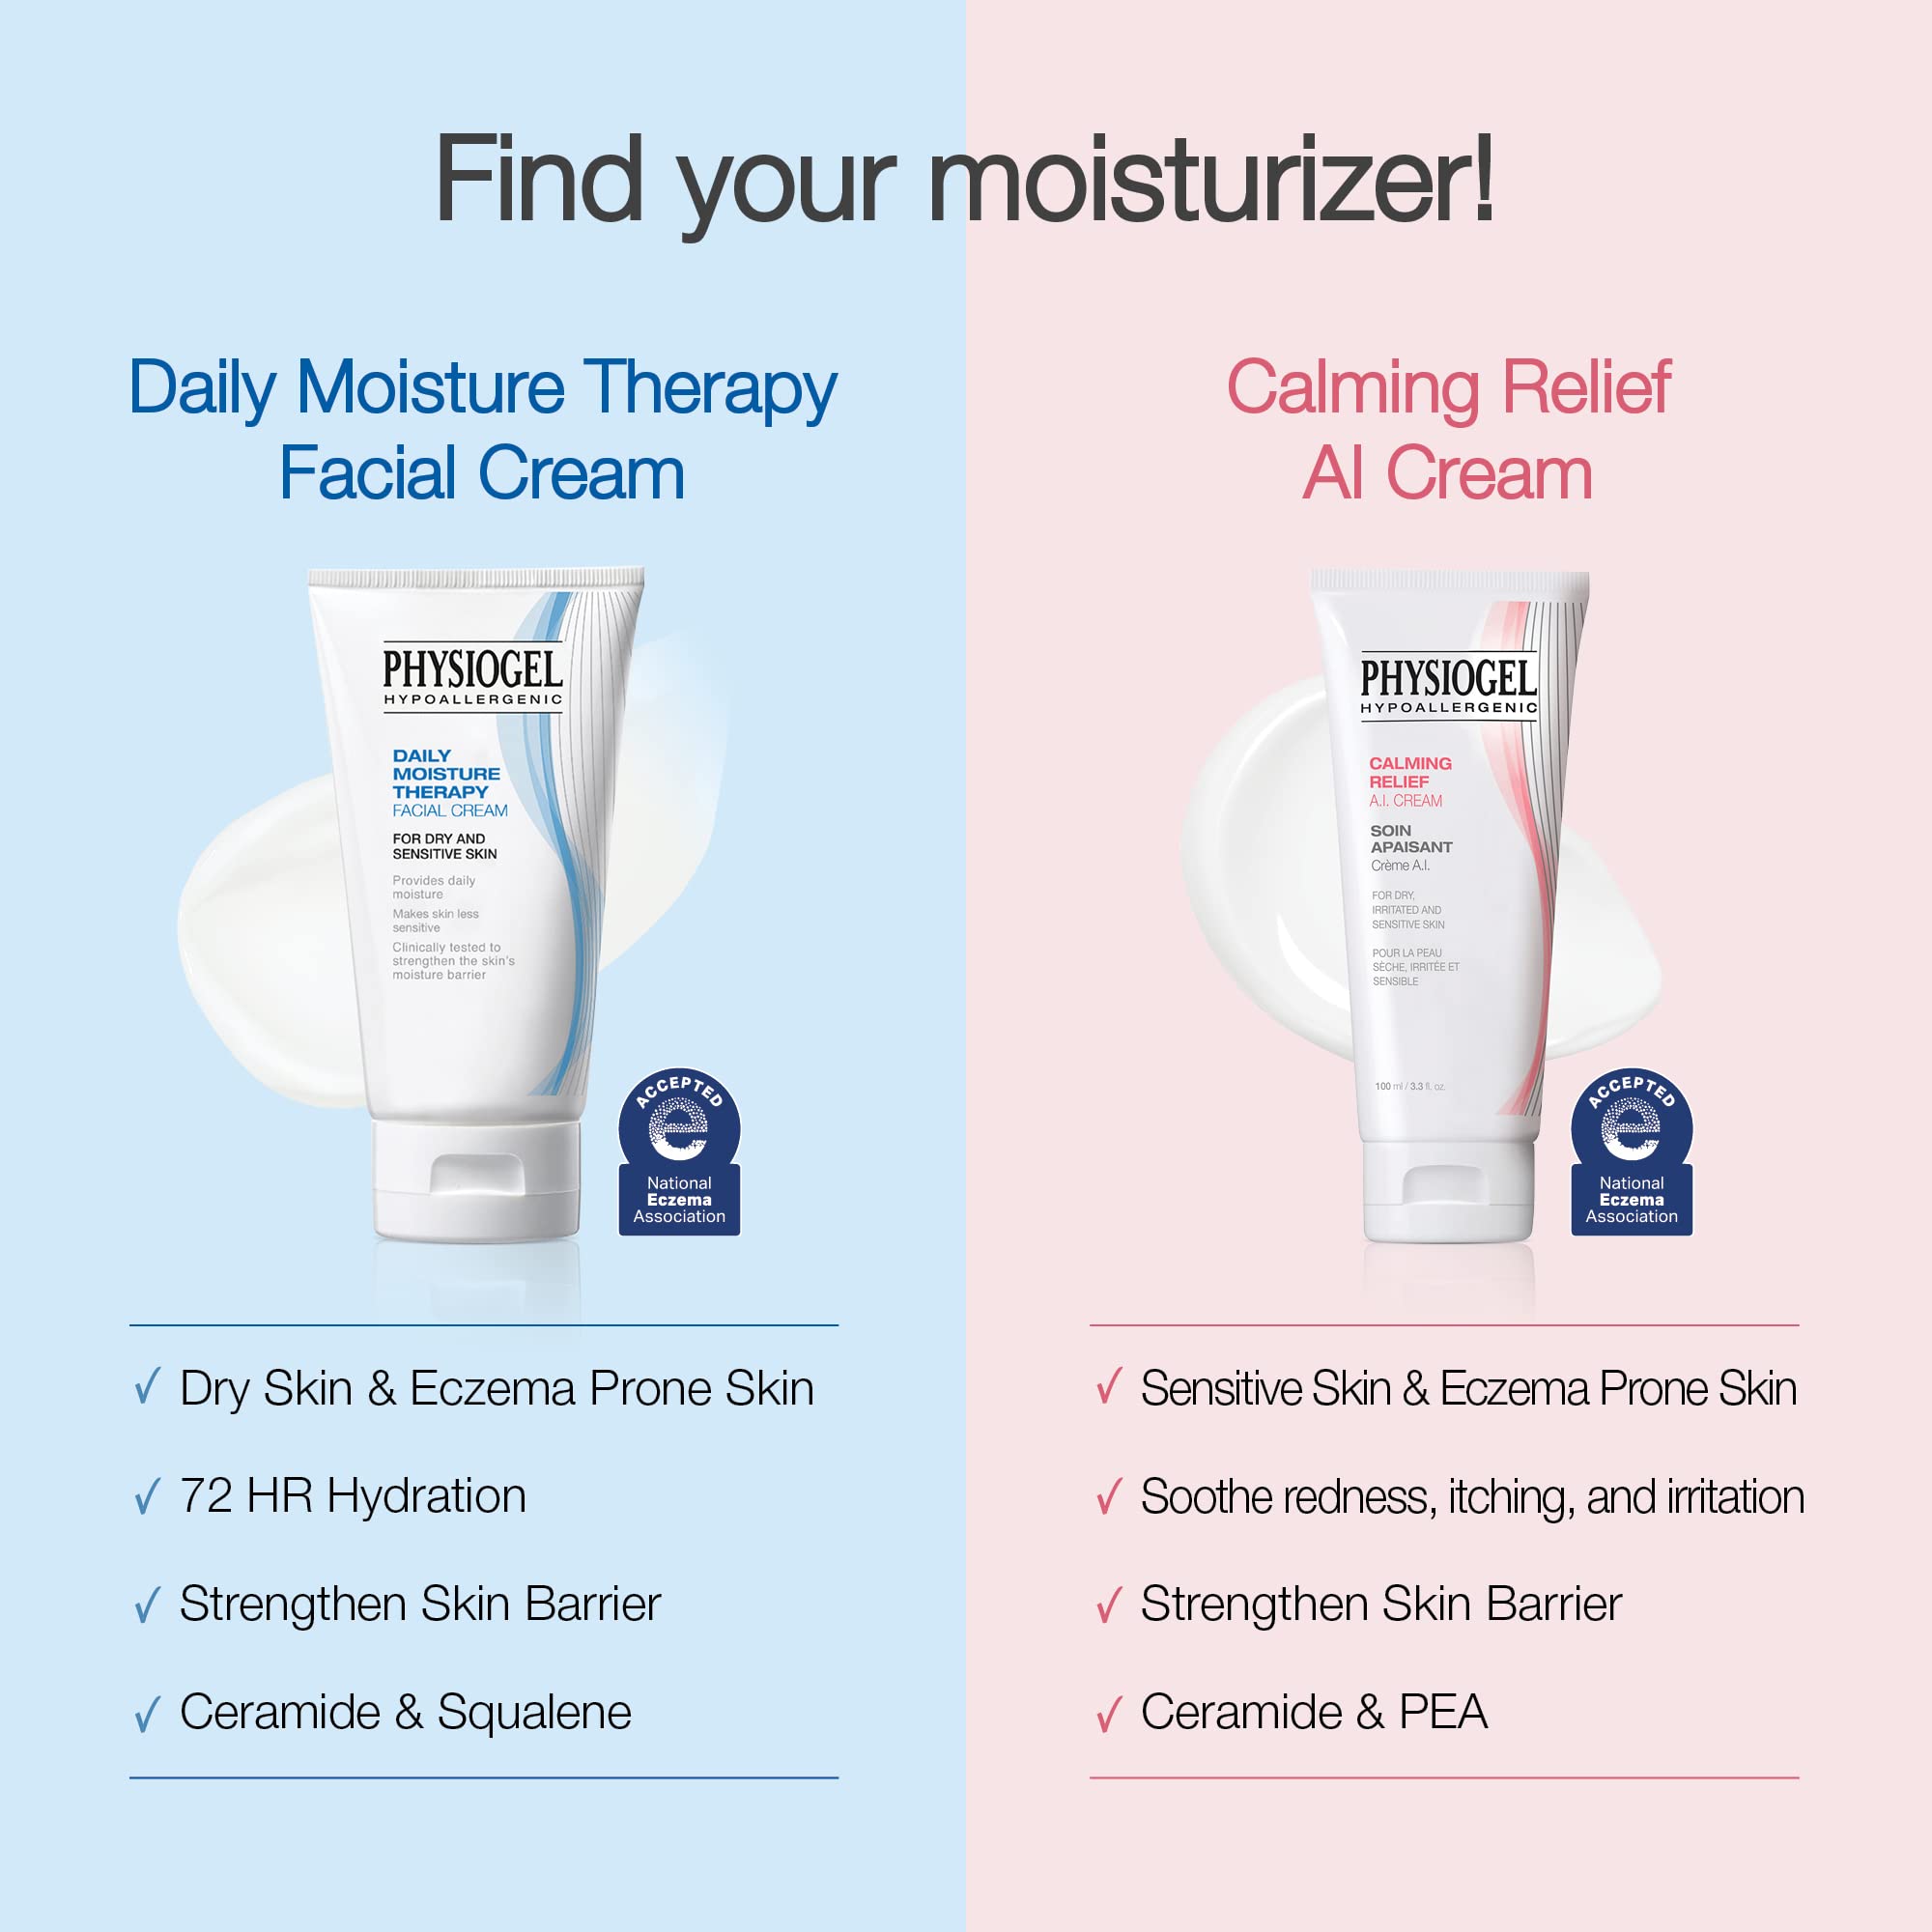 Physiogel Daily Moisture Therapy Face Cream | Eczema Cream for Dry & Sensitive Skin | Hypoallergenic, Non-Comedogenic, Fragrance Free & Irritant Free | Intense 72 HR Moisturizer Soothes & Heals